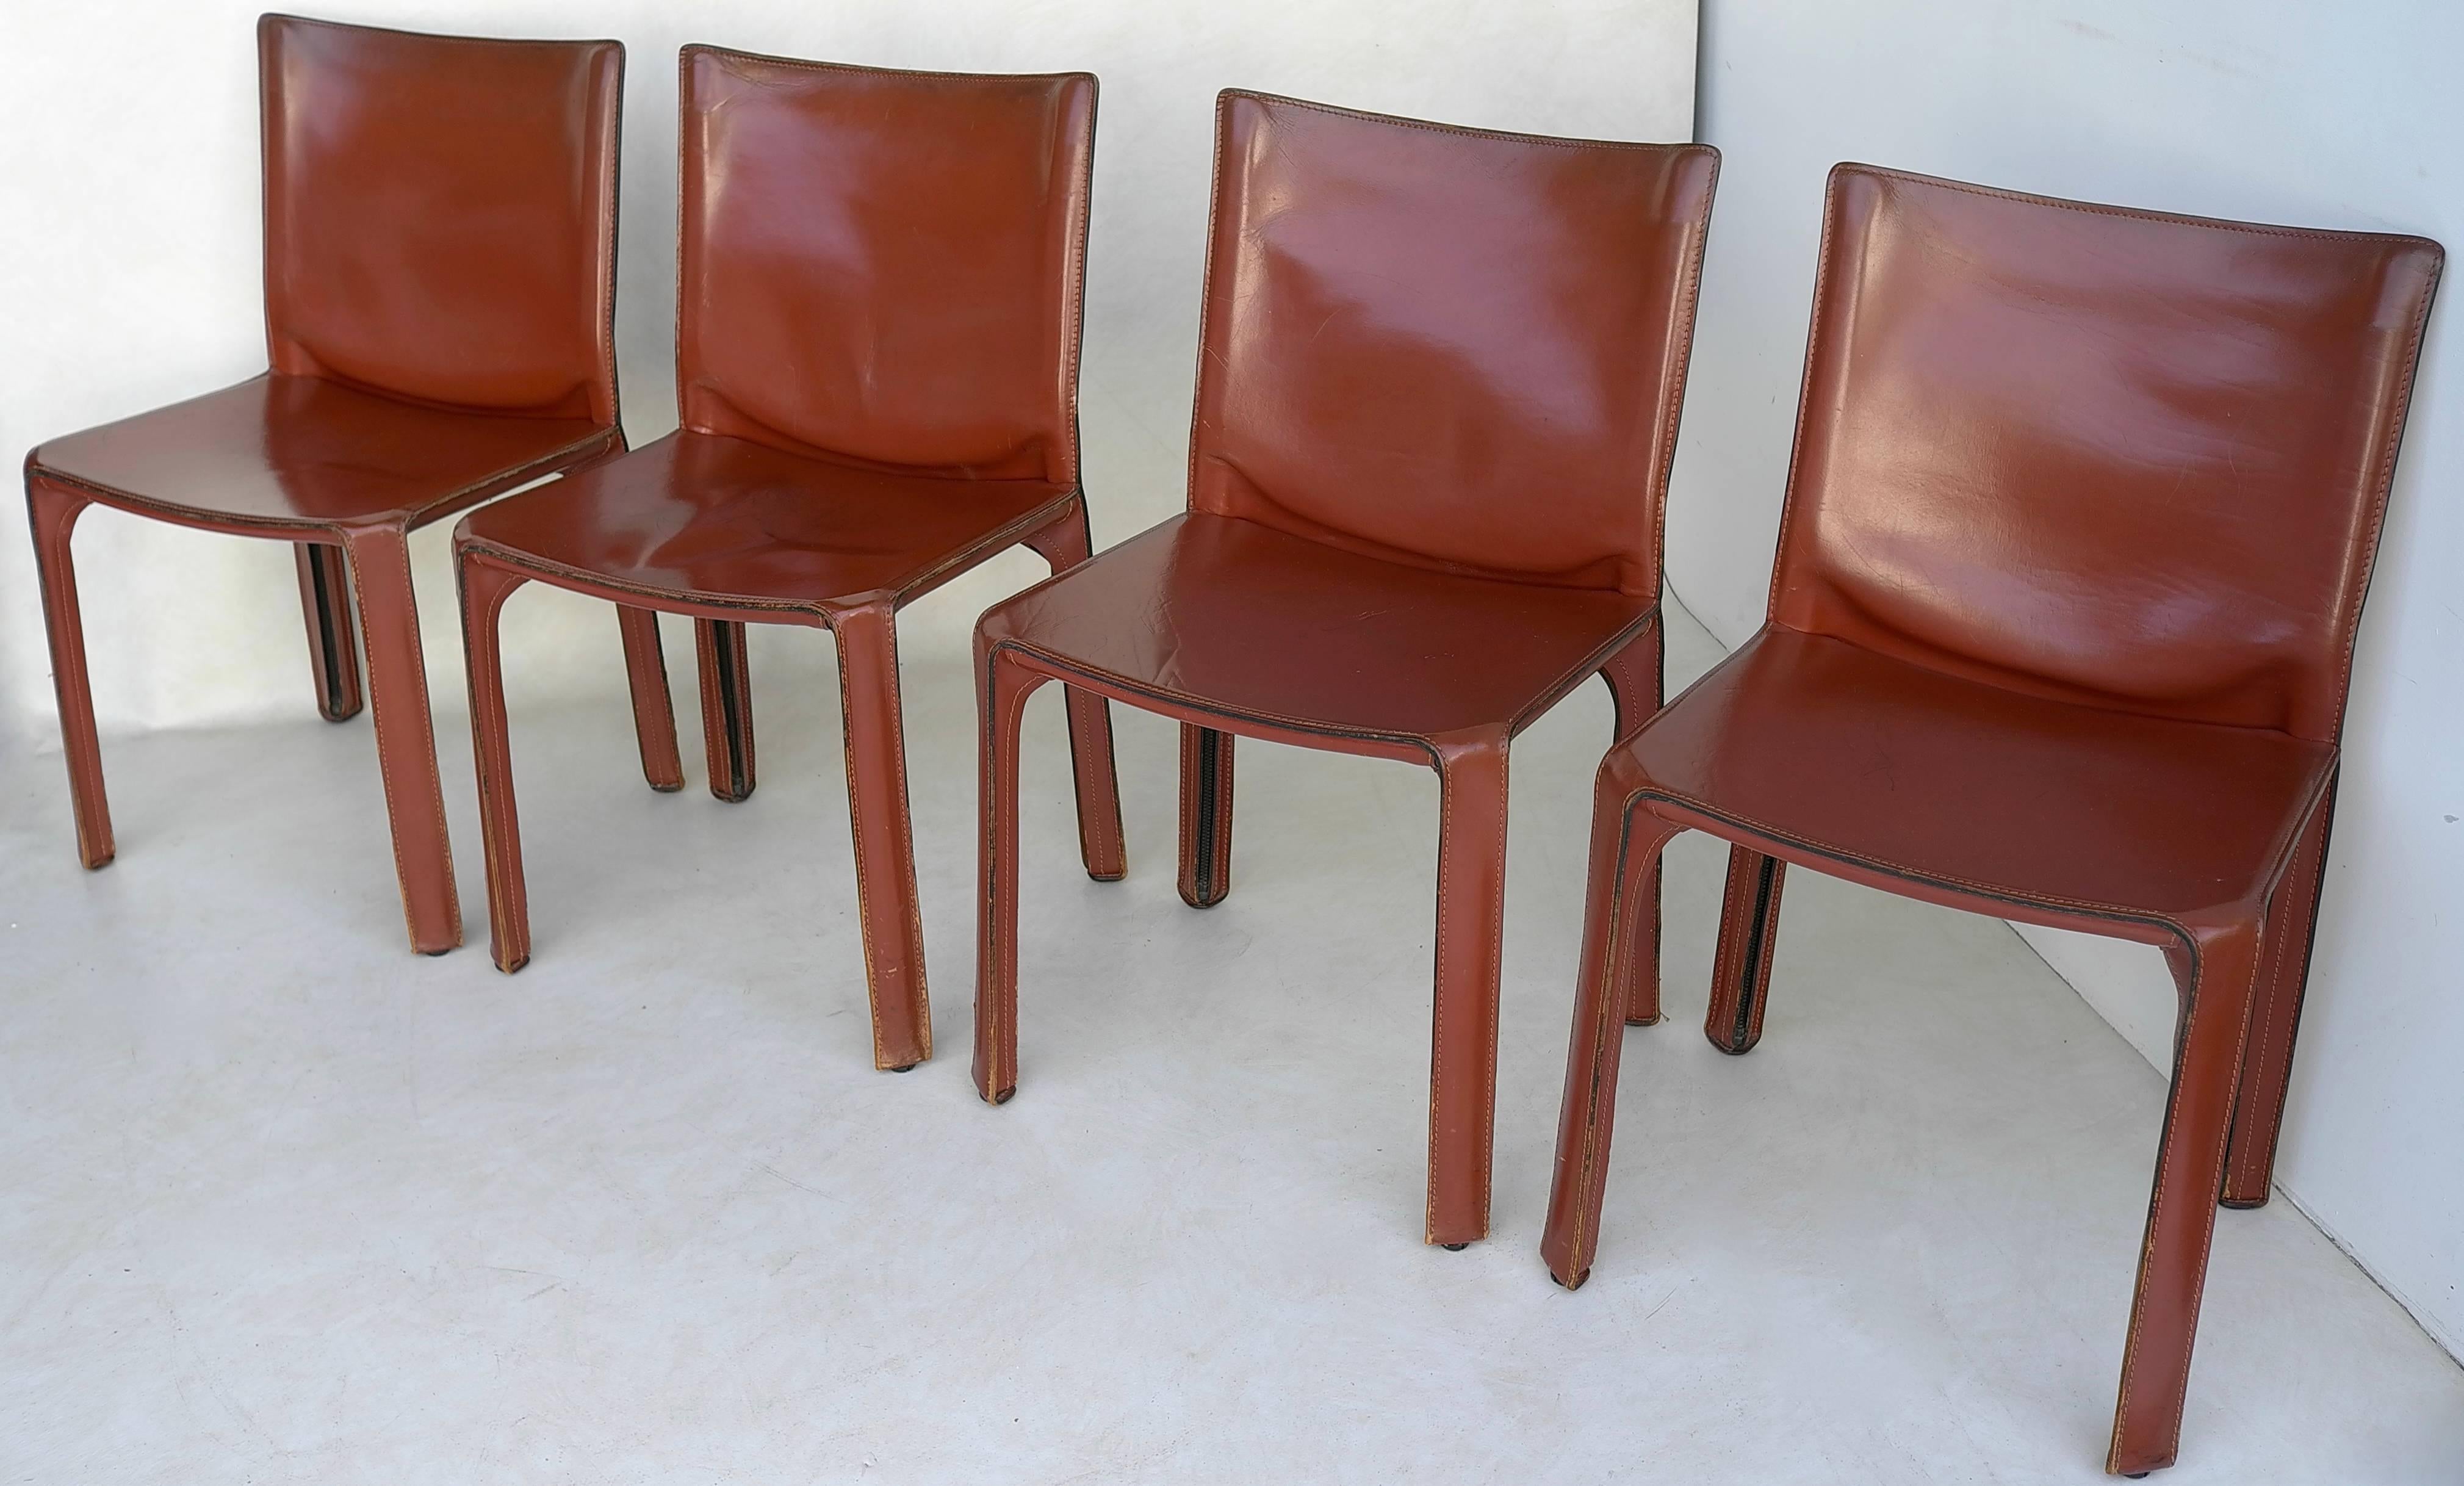 Set of four cab chairs by Mario Bellini for Cassina, Italy, circa 1970s. Wonderful original patina and wear. Broken in like your favorite baseball glove. Signed underneath with Cassina impressed mark on the leather and again on the frame.

Also a